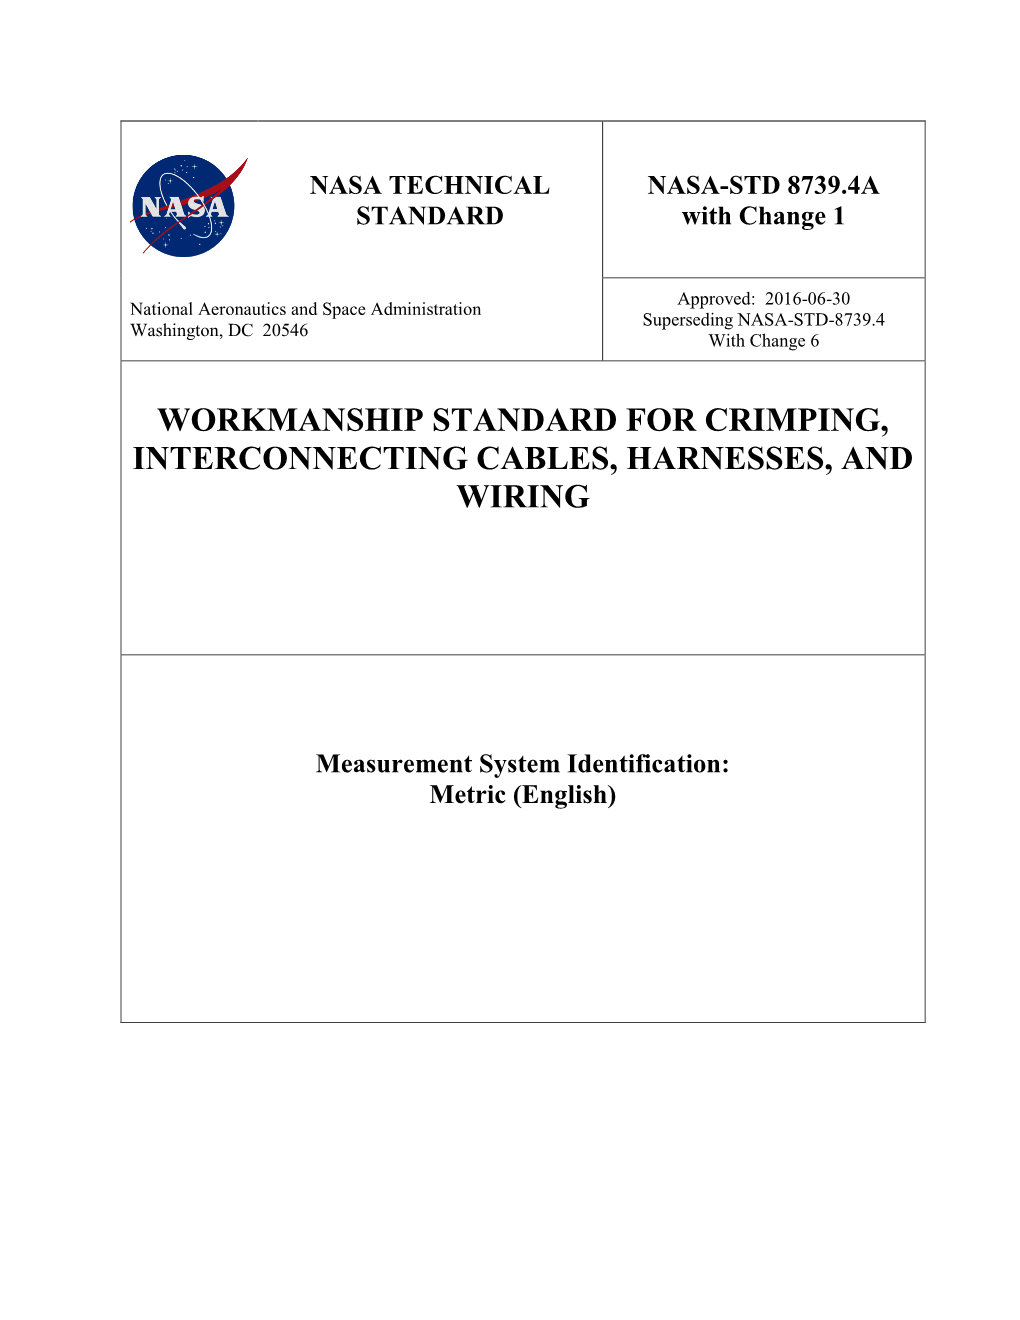 Workmanship Standard for Crimping, Interconnecting Cables, Harnesses, and Wiring